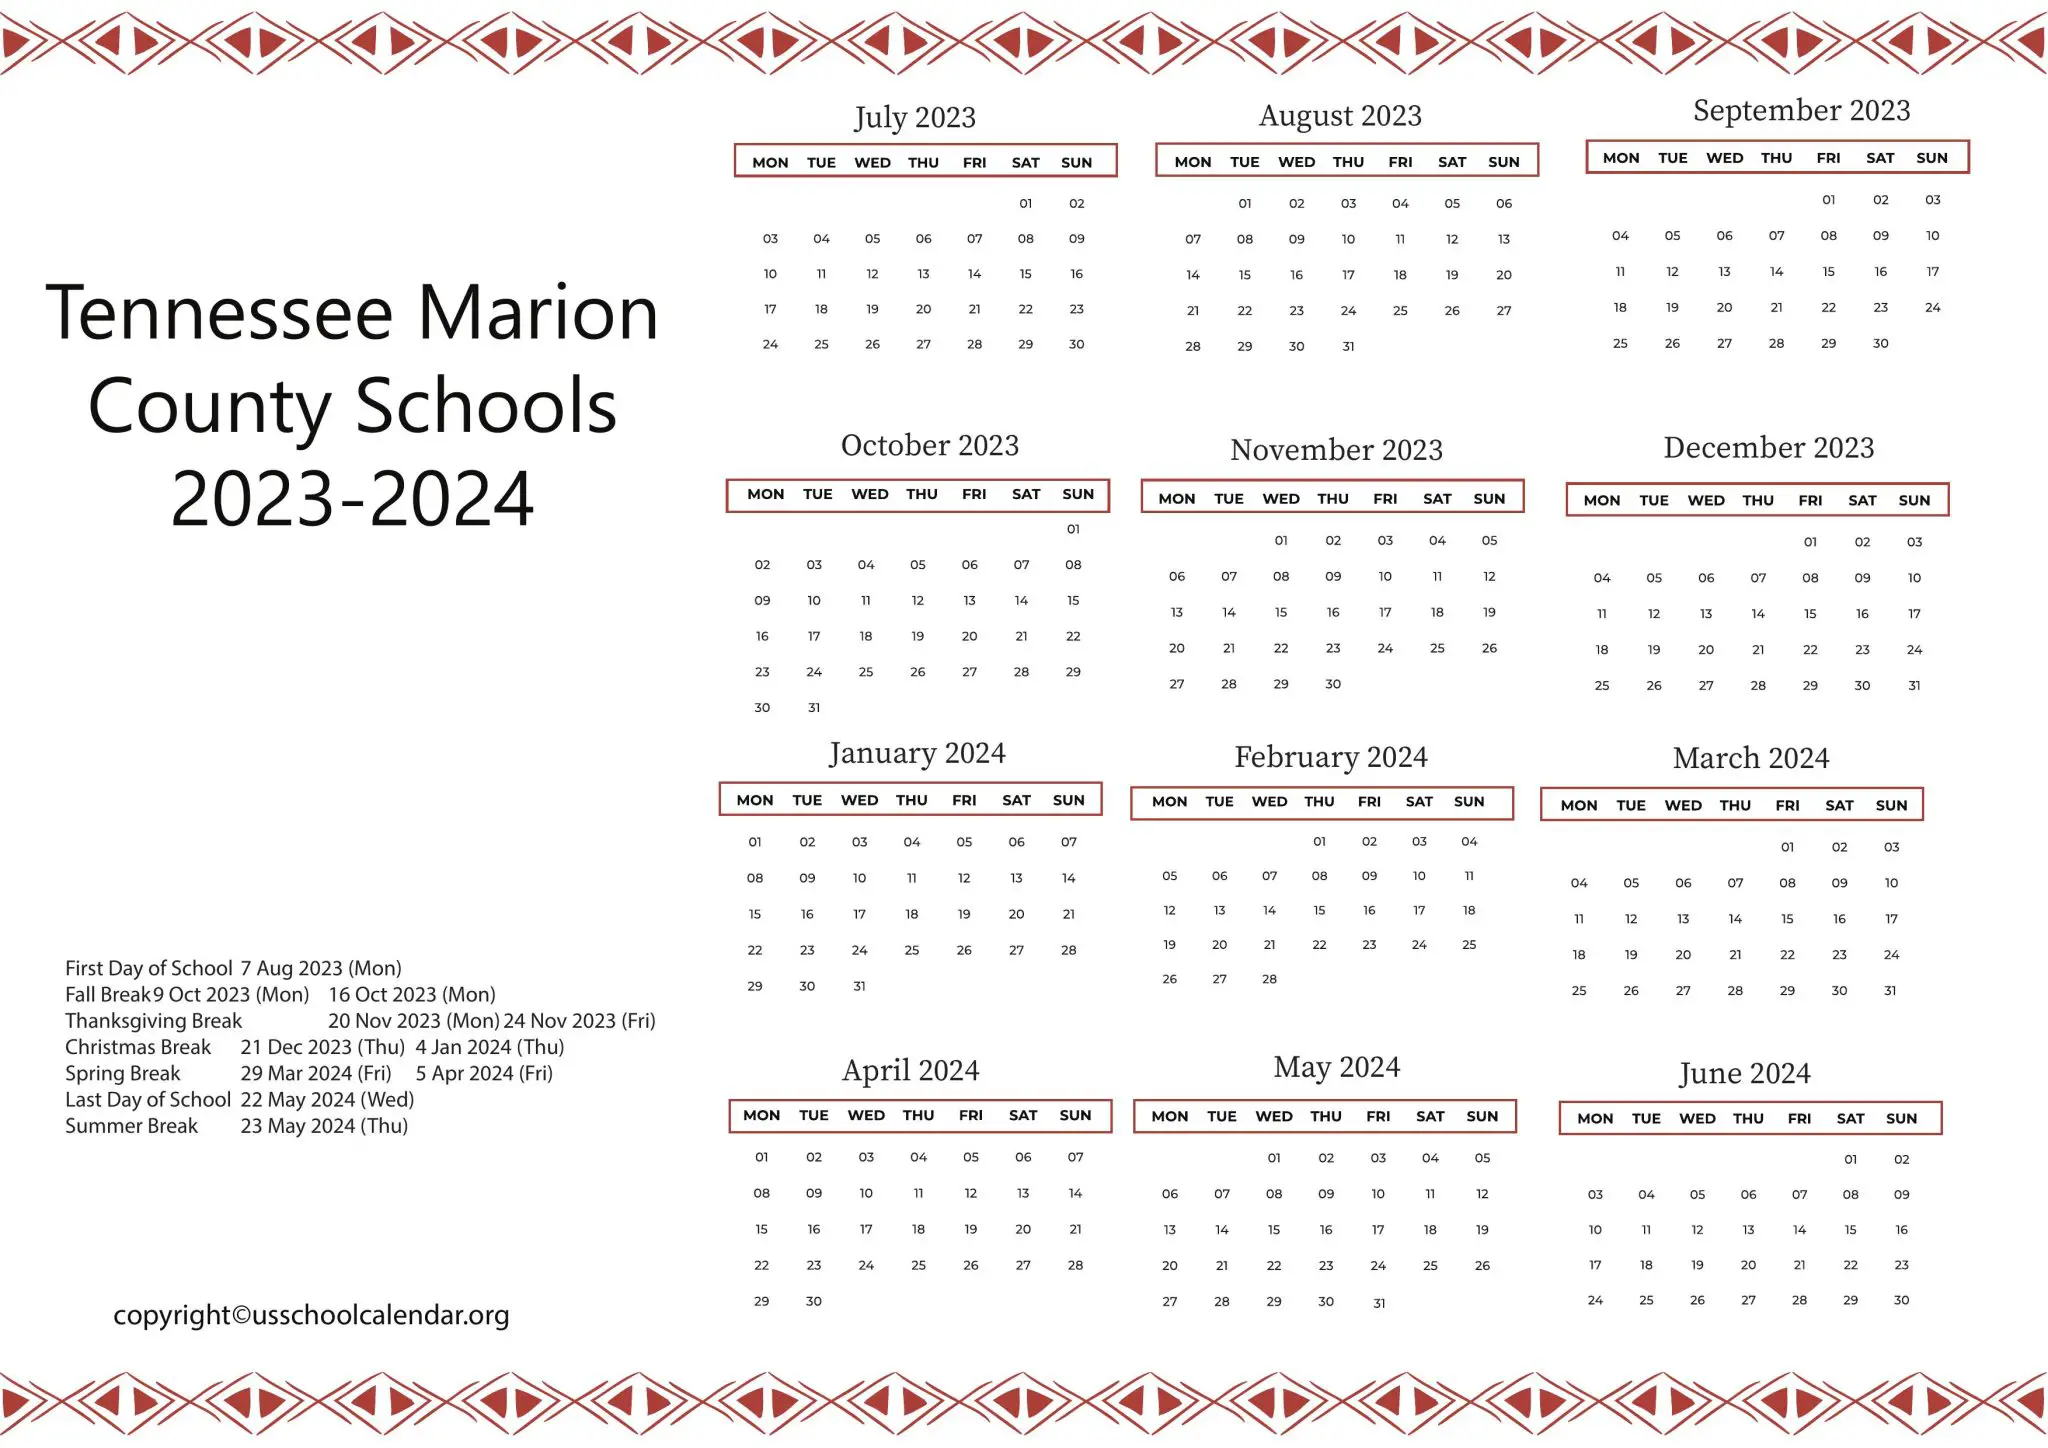 tennessee-marion-county-schools-calendar-2023-2024